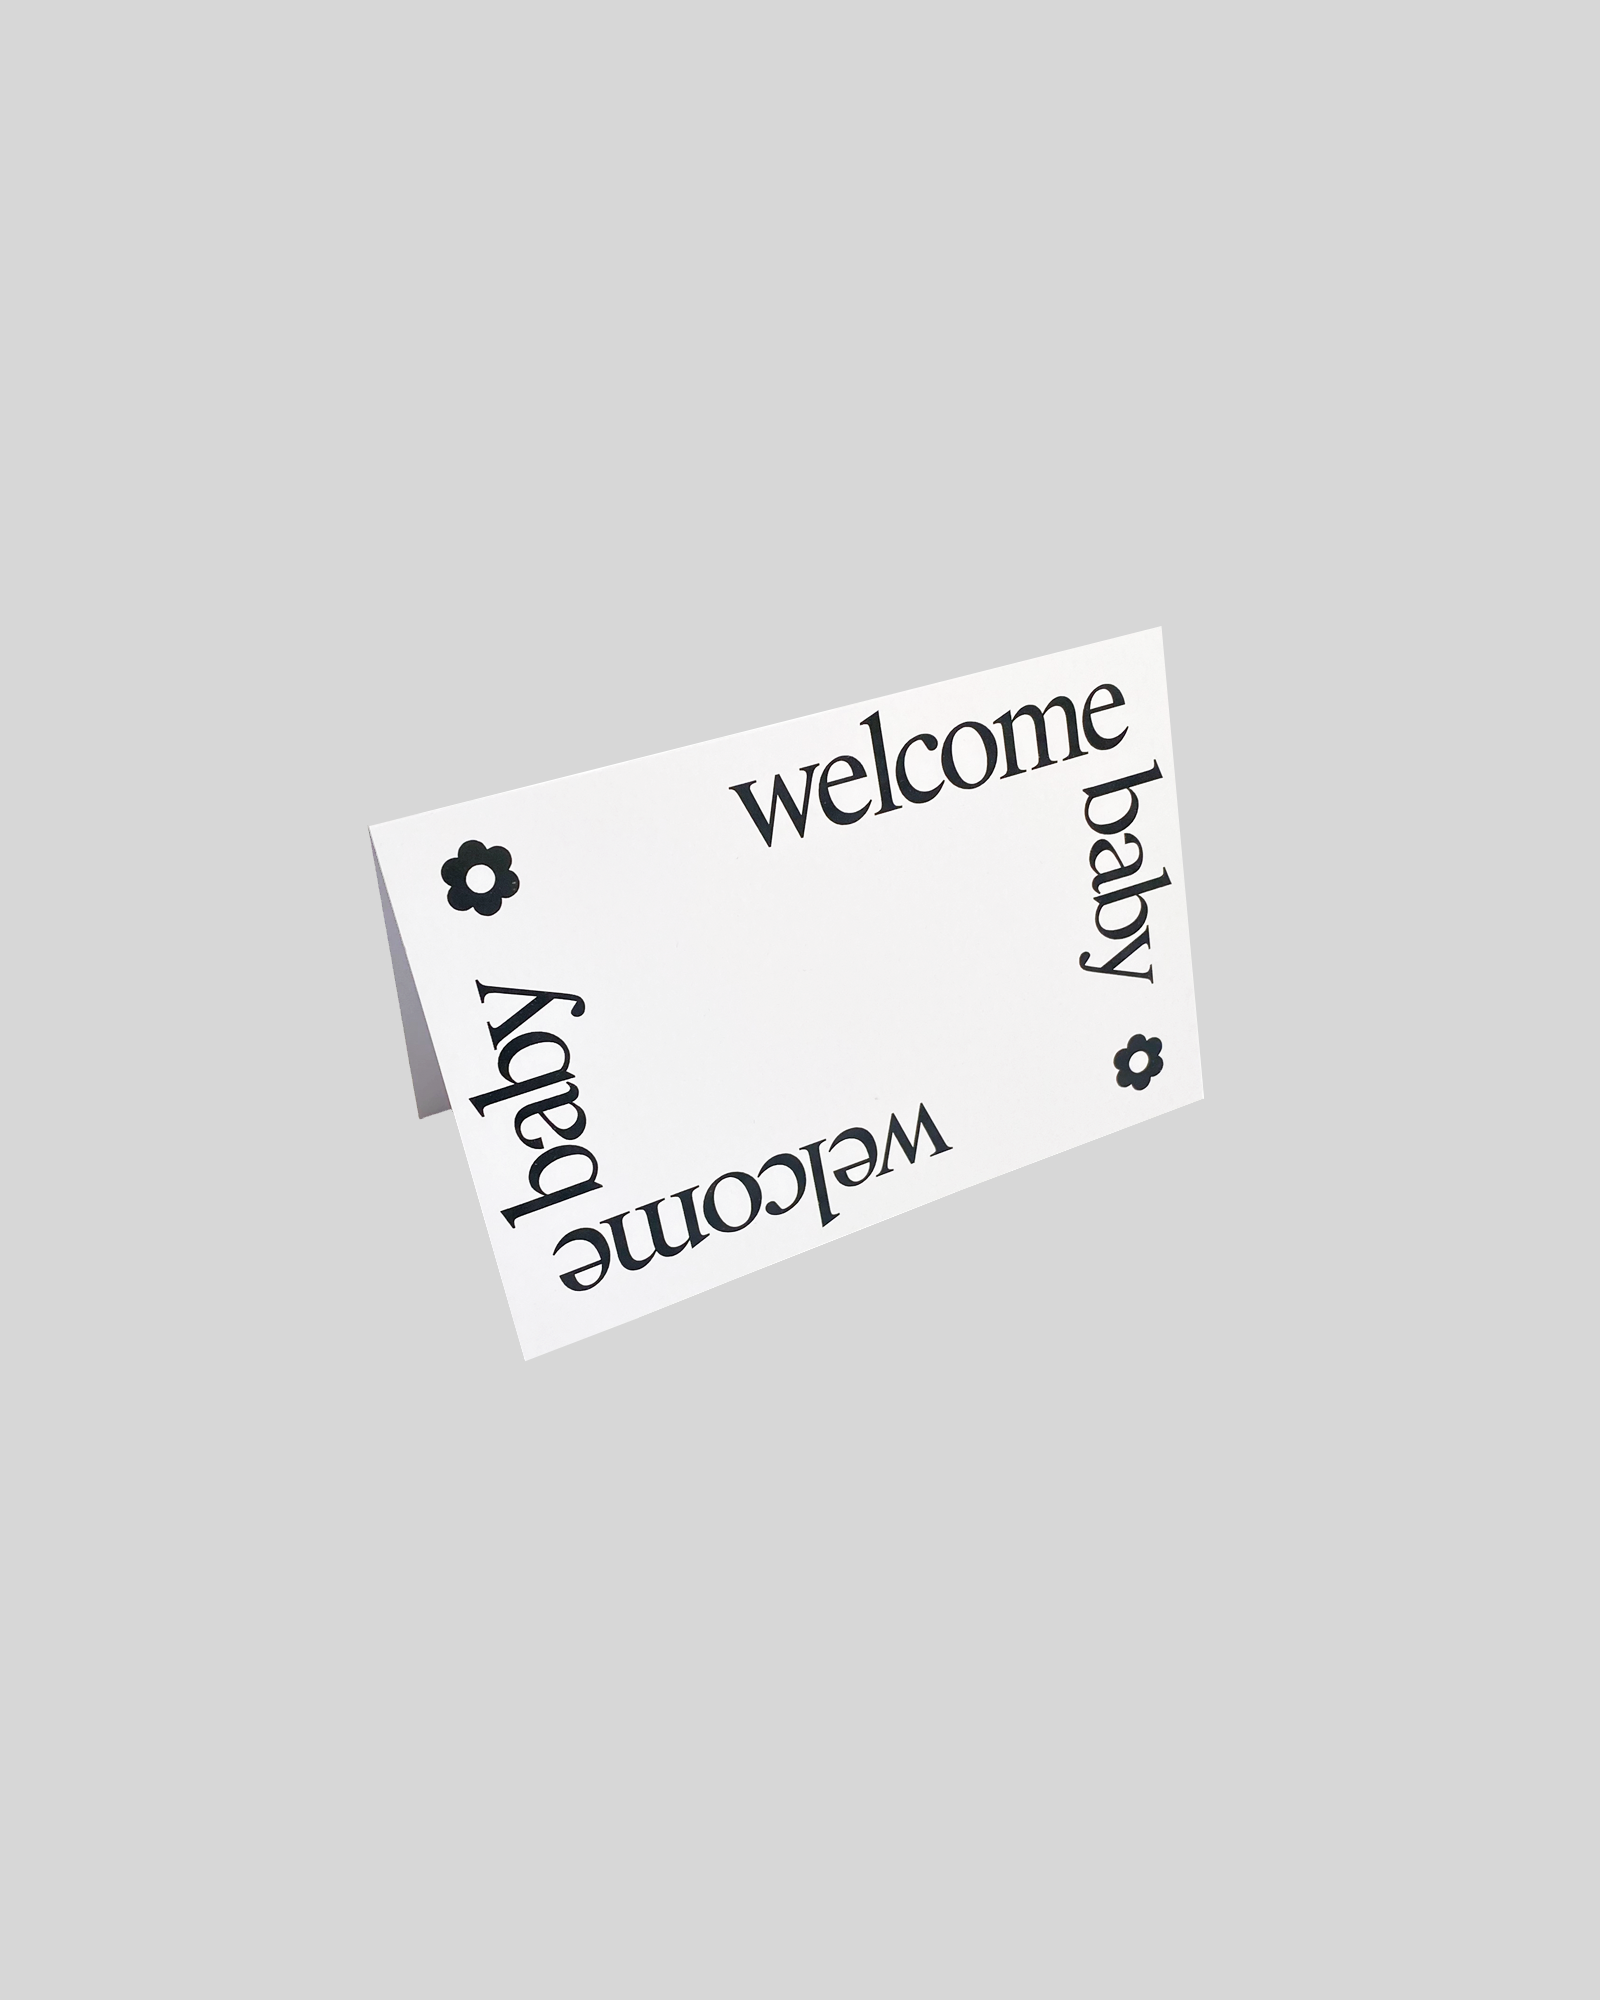 welcome baby card